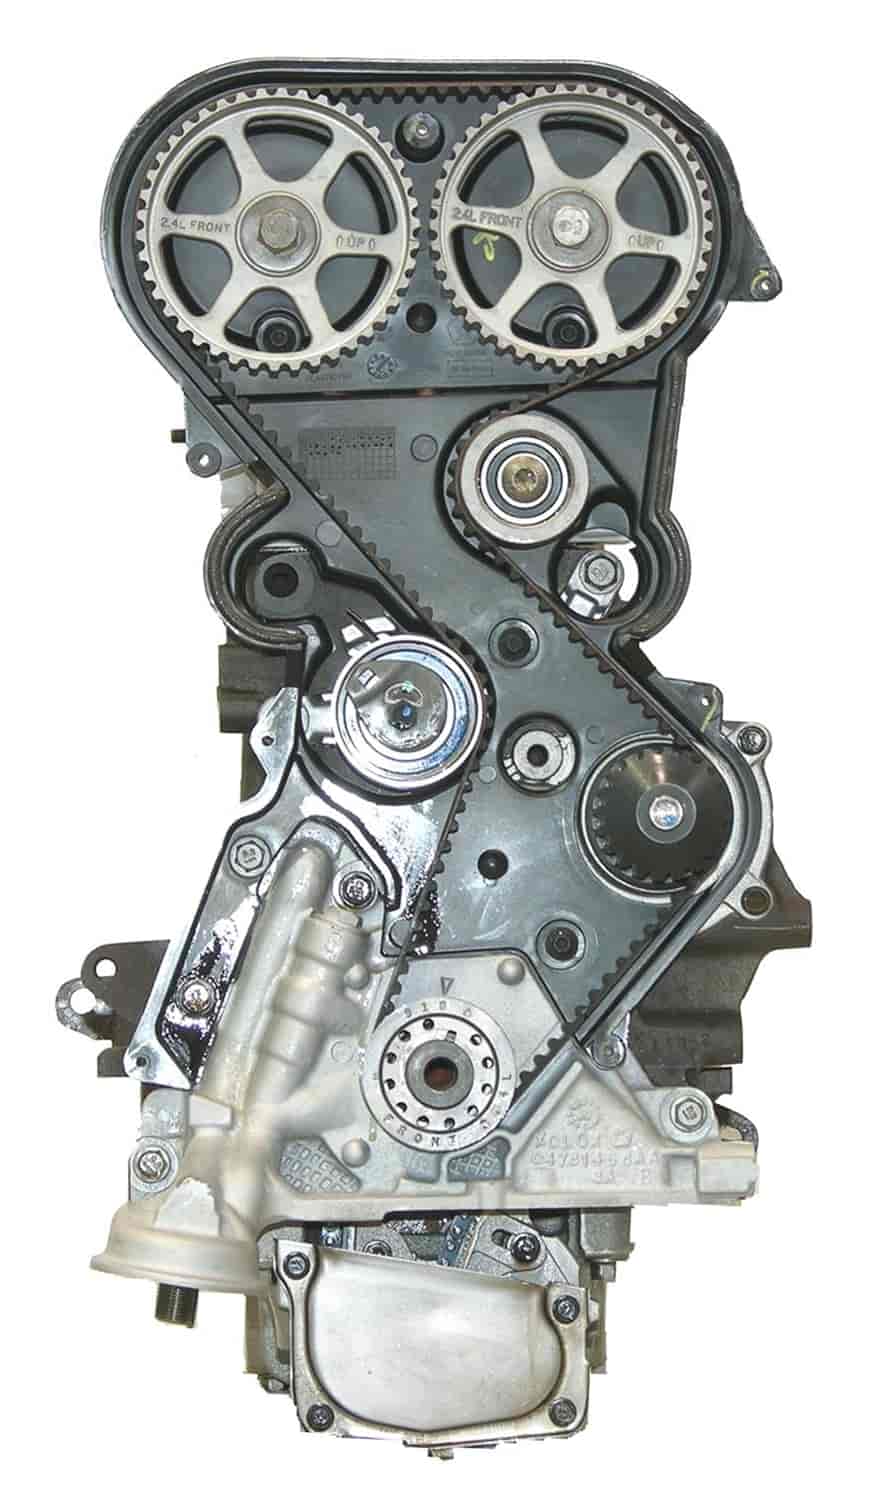 Remanufactured Crate Engine for 2001 Chrysler/Dodge with 2.4L L4